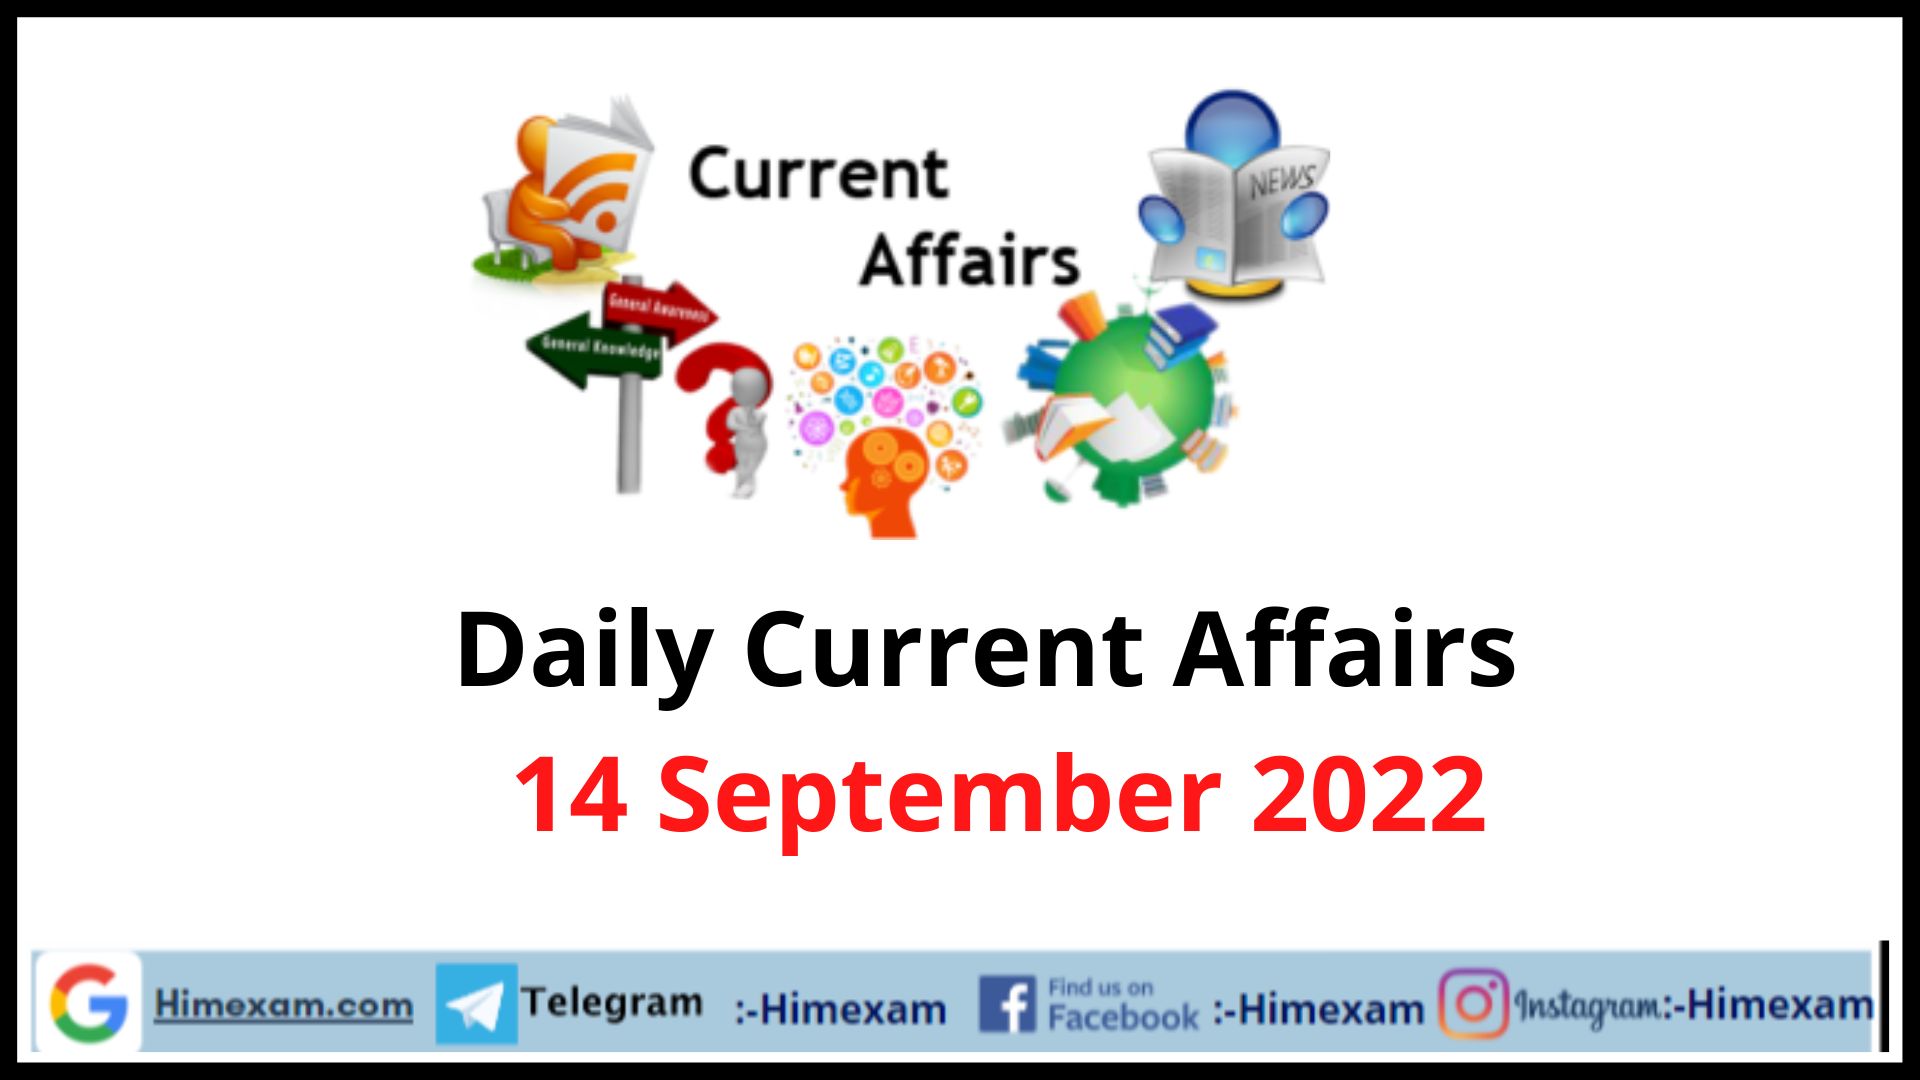 Daily Current Affairs 14 September 2022